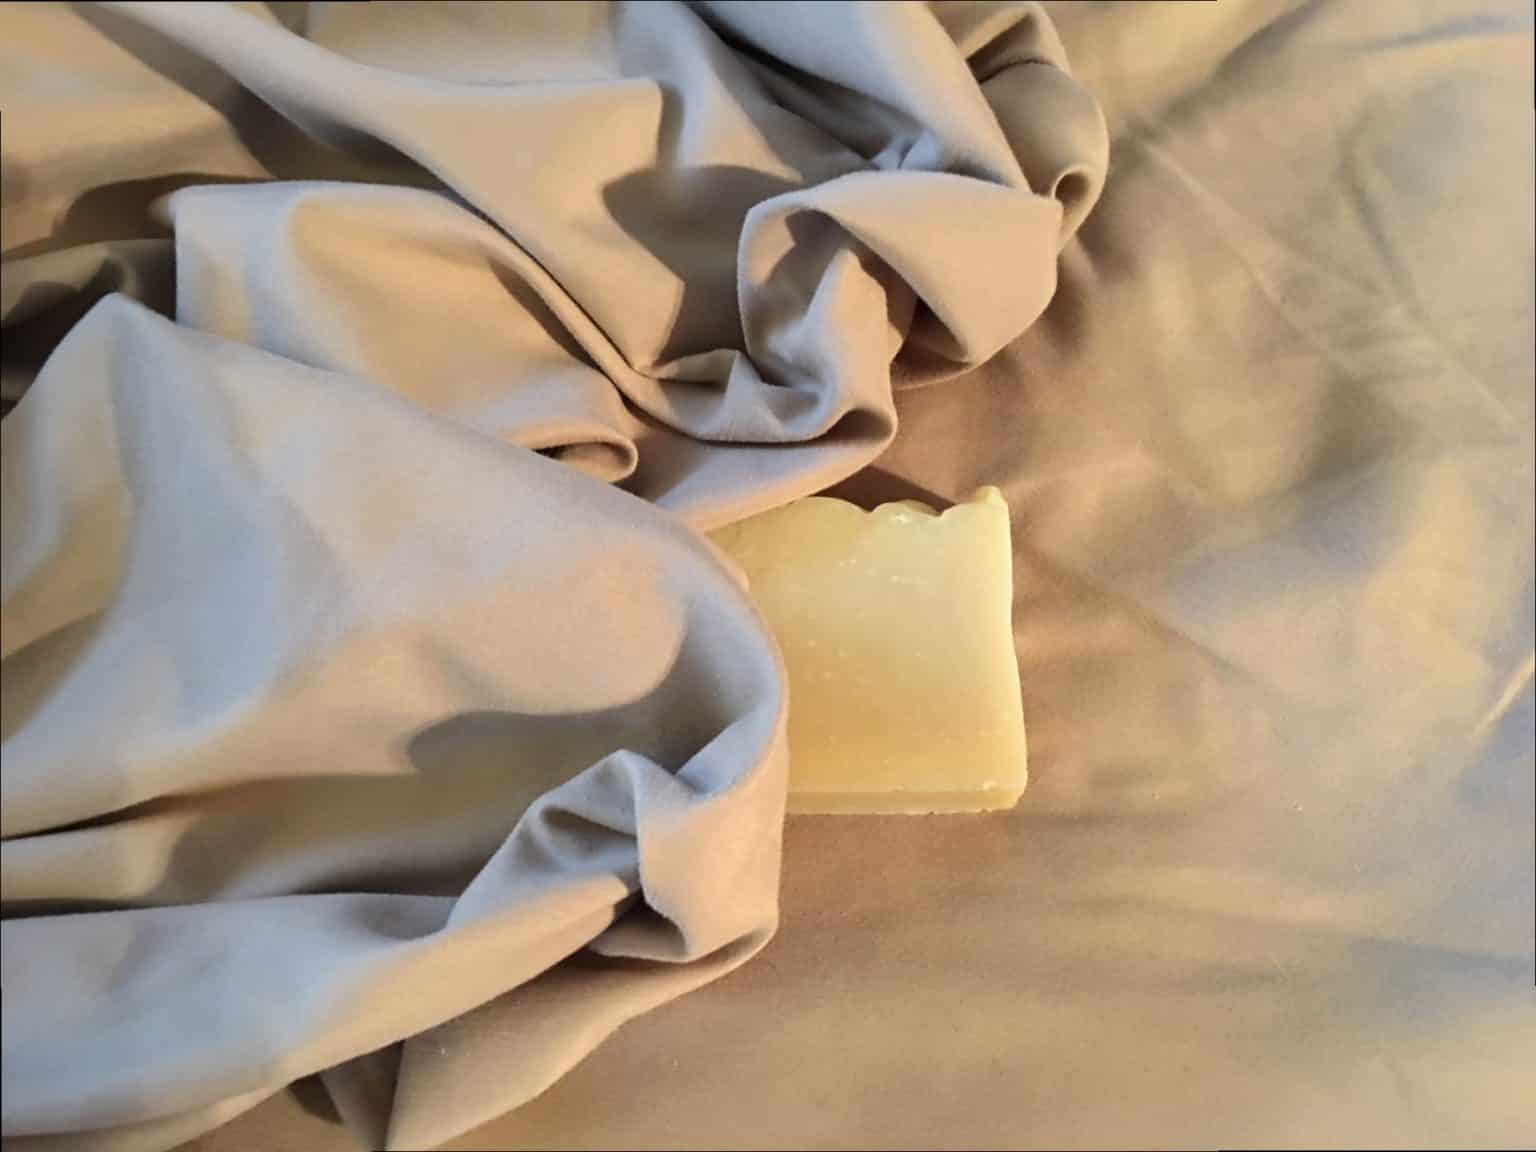 soap under the sheets